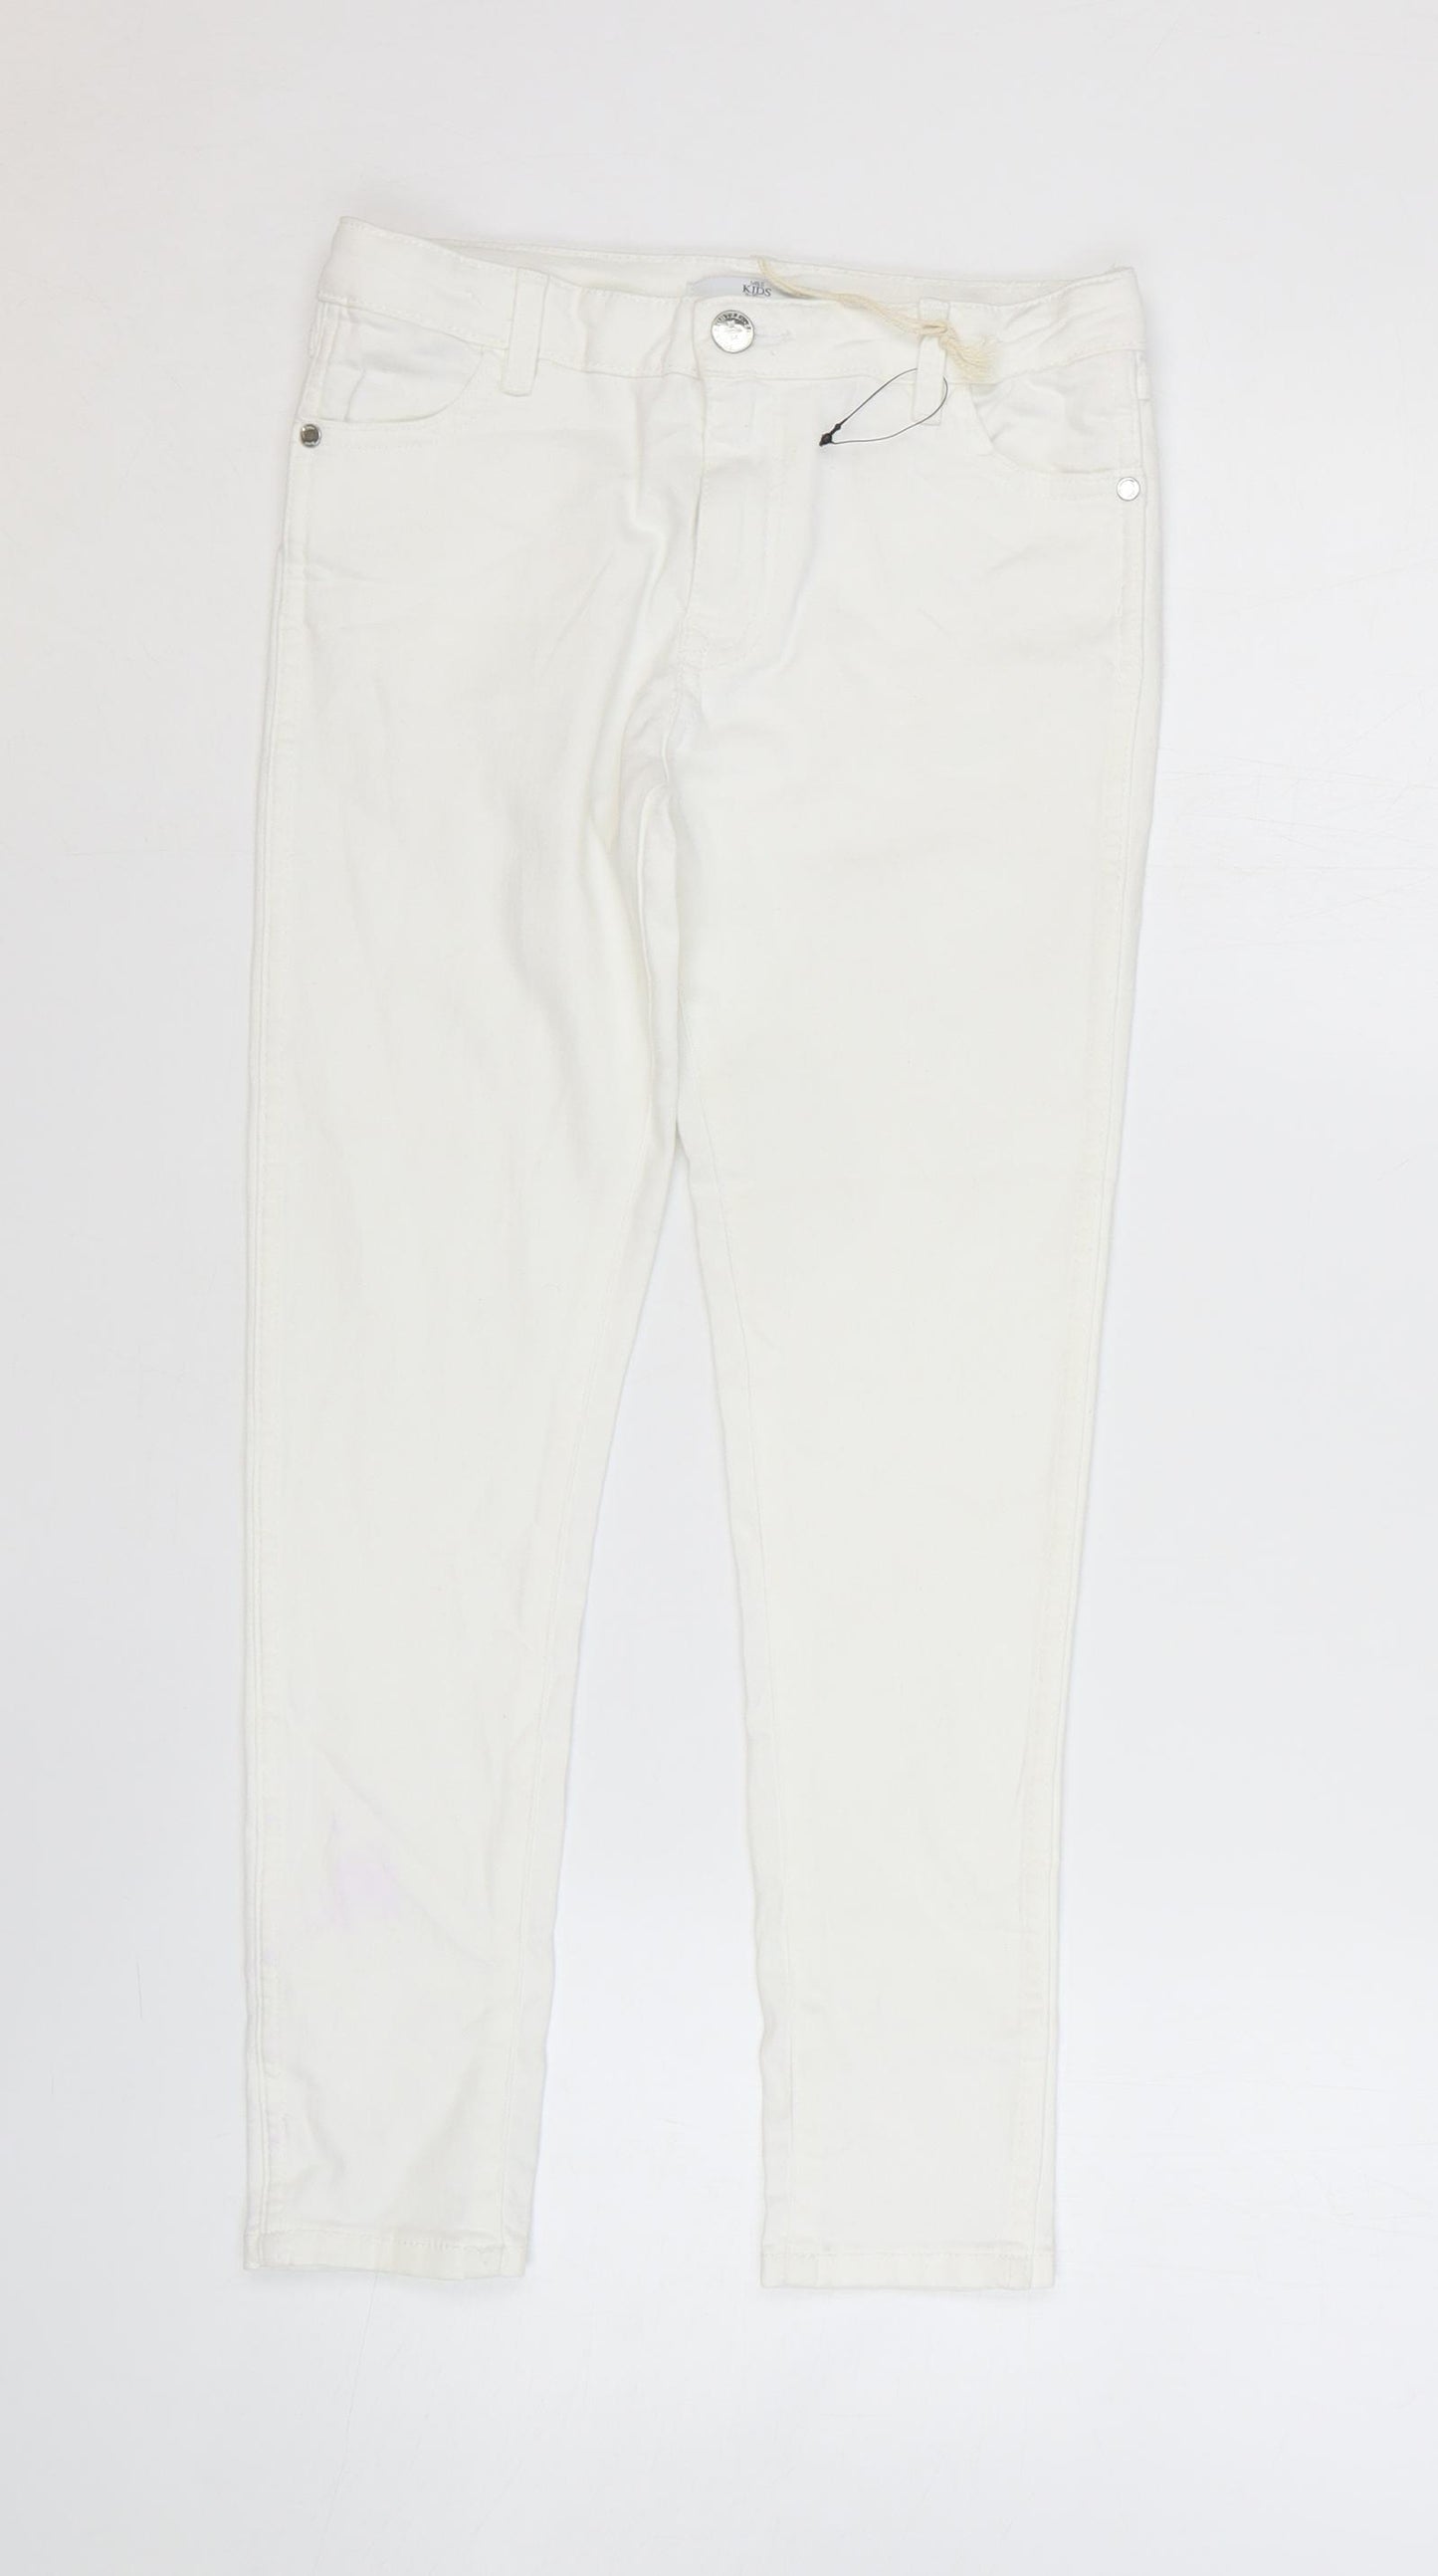 Marks and Spencer Girls White Cotton Skinny Jeans Size 9-10 Years Regular Zip